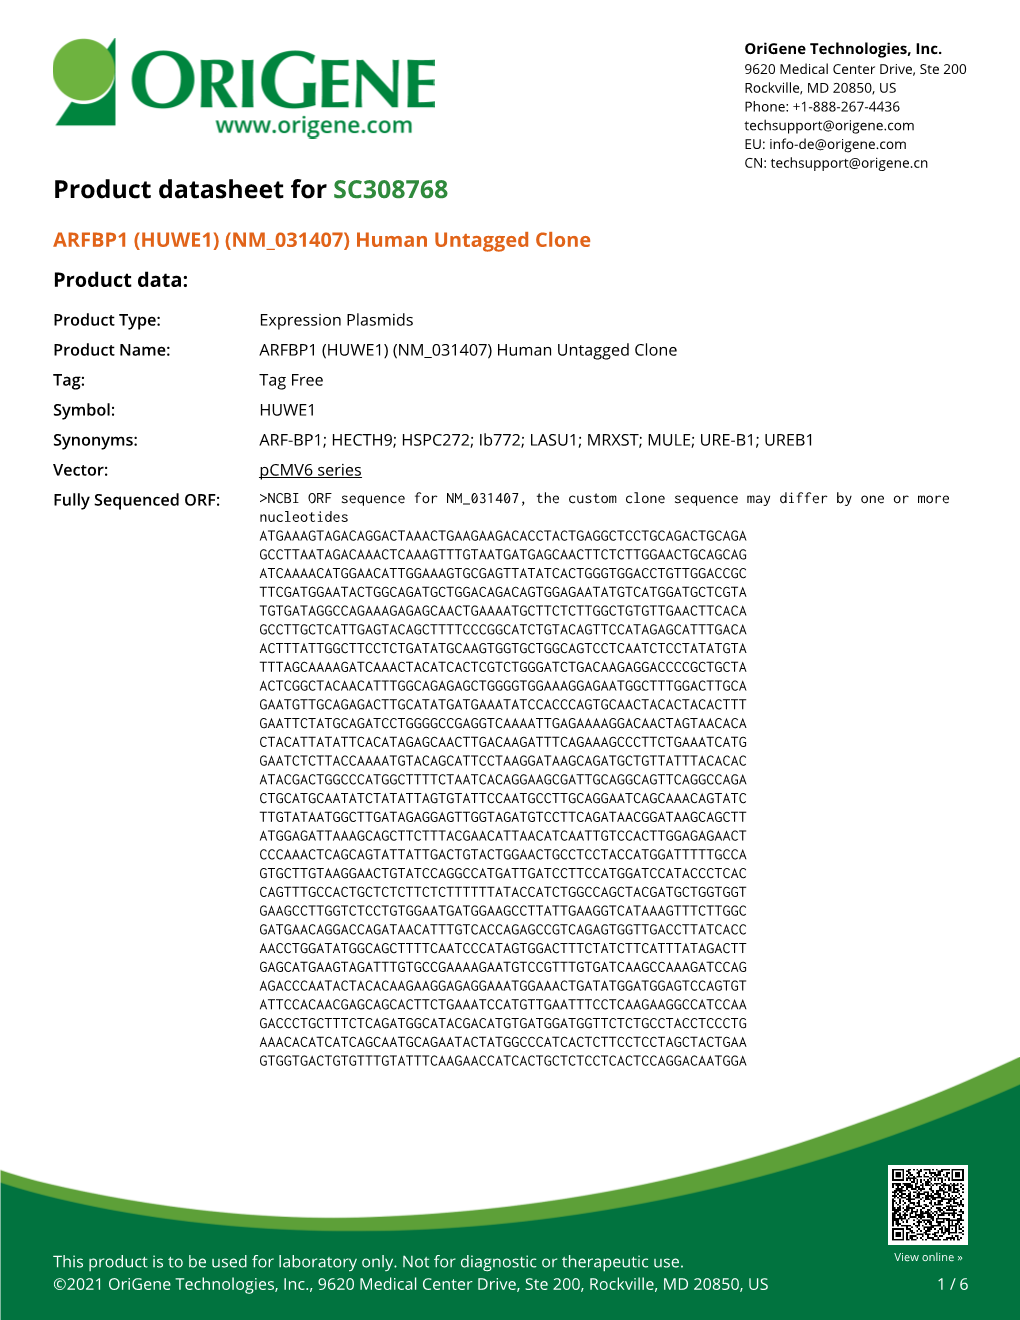 ARFBP1 (HUWE1) (NM 031407) Human Untagged Clone Product Data